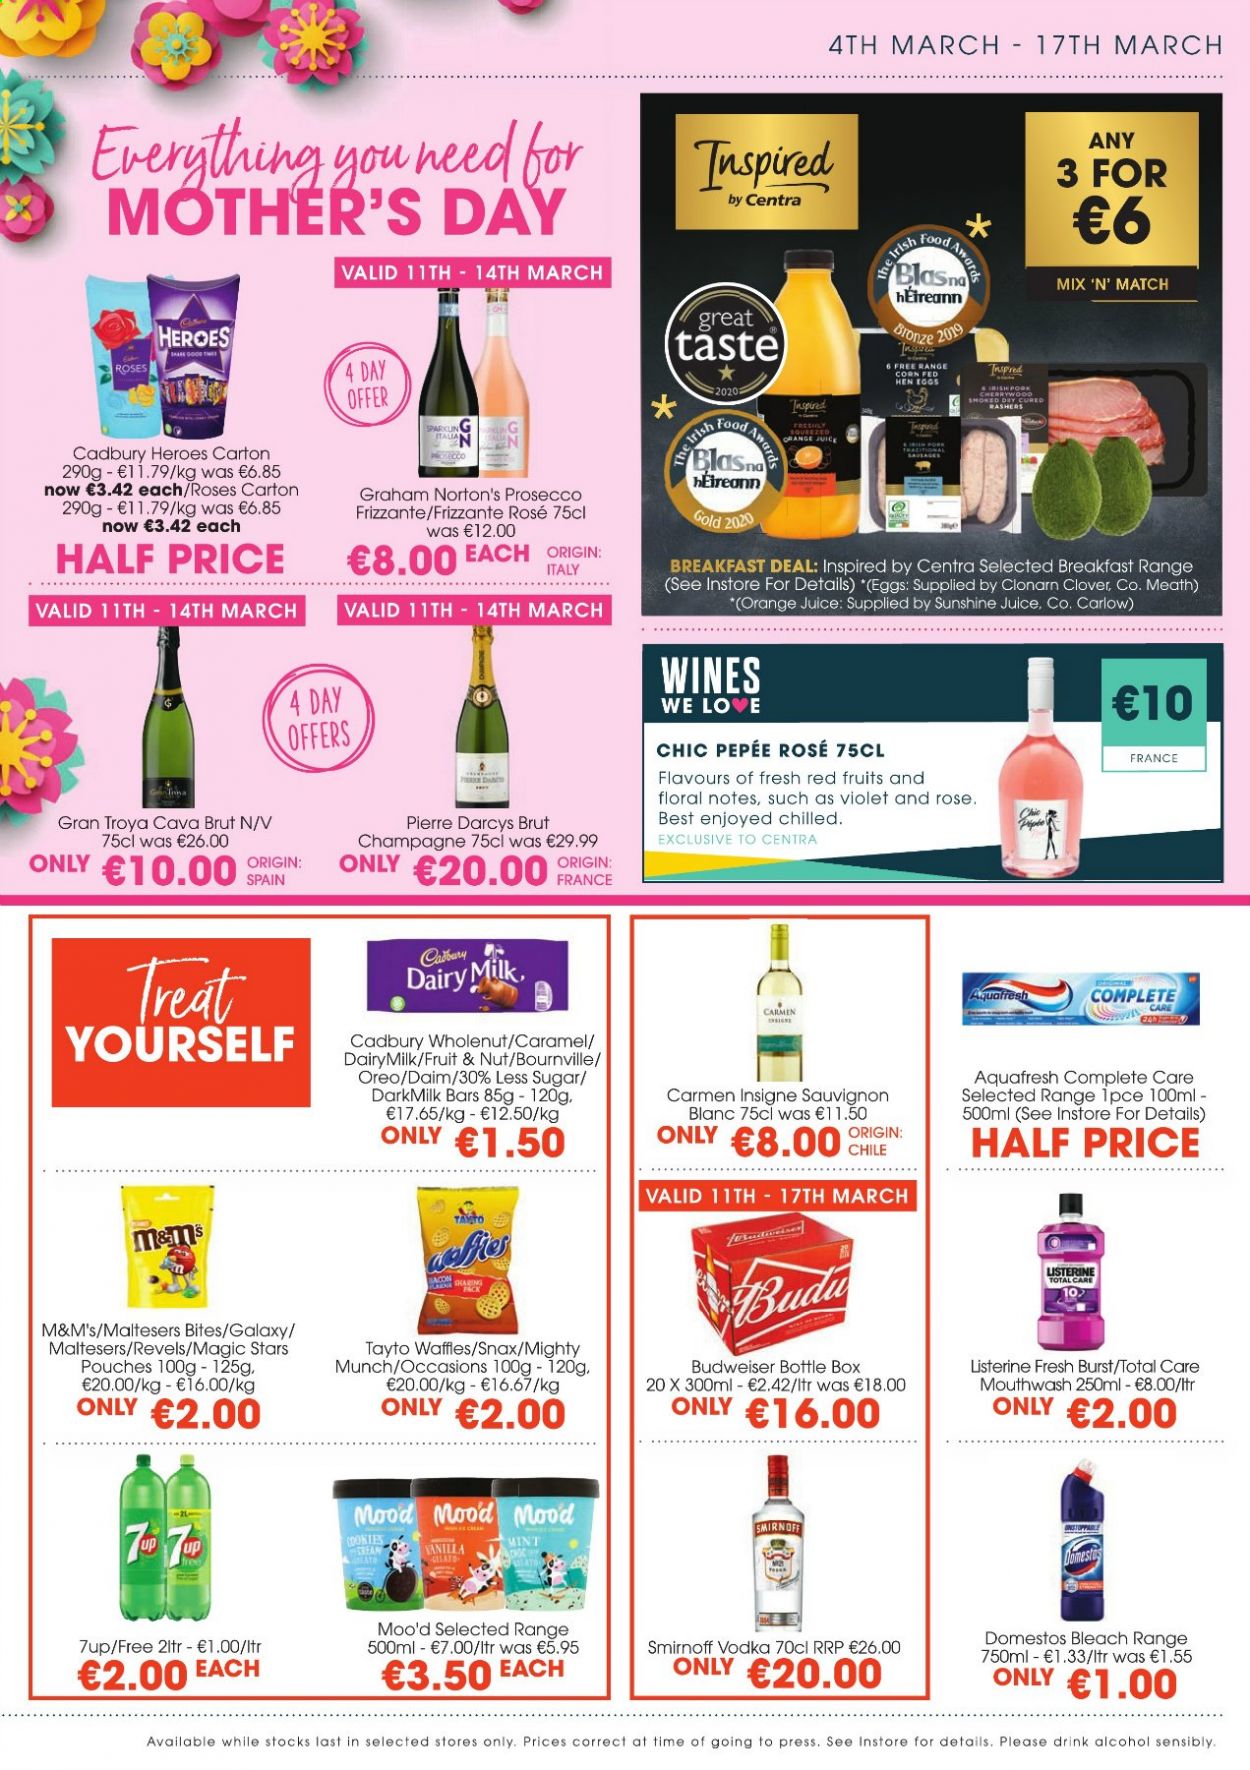 thumbnail - Centra offer  - 04.03.2021 - 17.03.2021 - Sales products - Budweiser, waffles, bacon, Oreo, Clover, eggs, Sunshine, cookies, M&M's, Maltesers, Cadbury, Dairy Milk, Tayto, caramel, orange juice, juice, 7UP, champagne, prosecco, wine, alcohol, Sauvignon Blanc, Smirnoff, vodka, beer, Domestos, bleach, Listerine, mouthwash, Brut. Page 3.